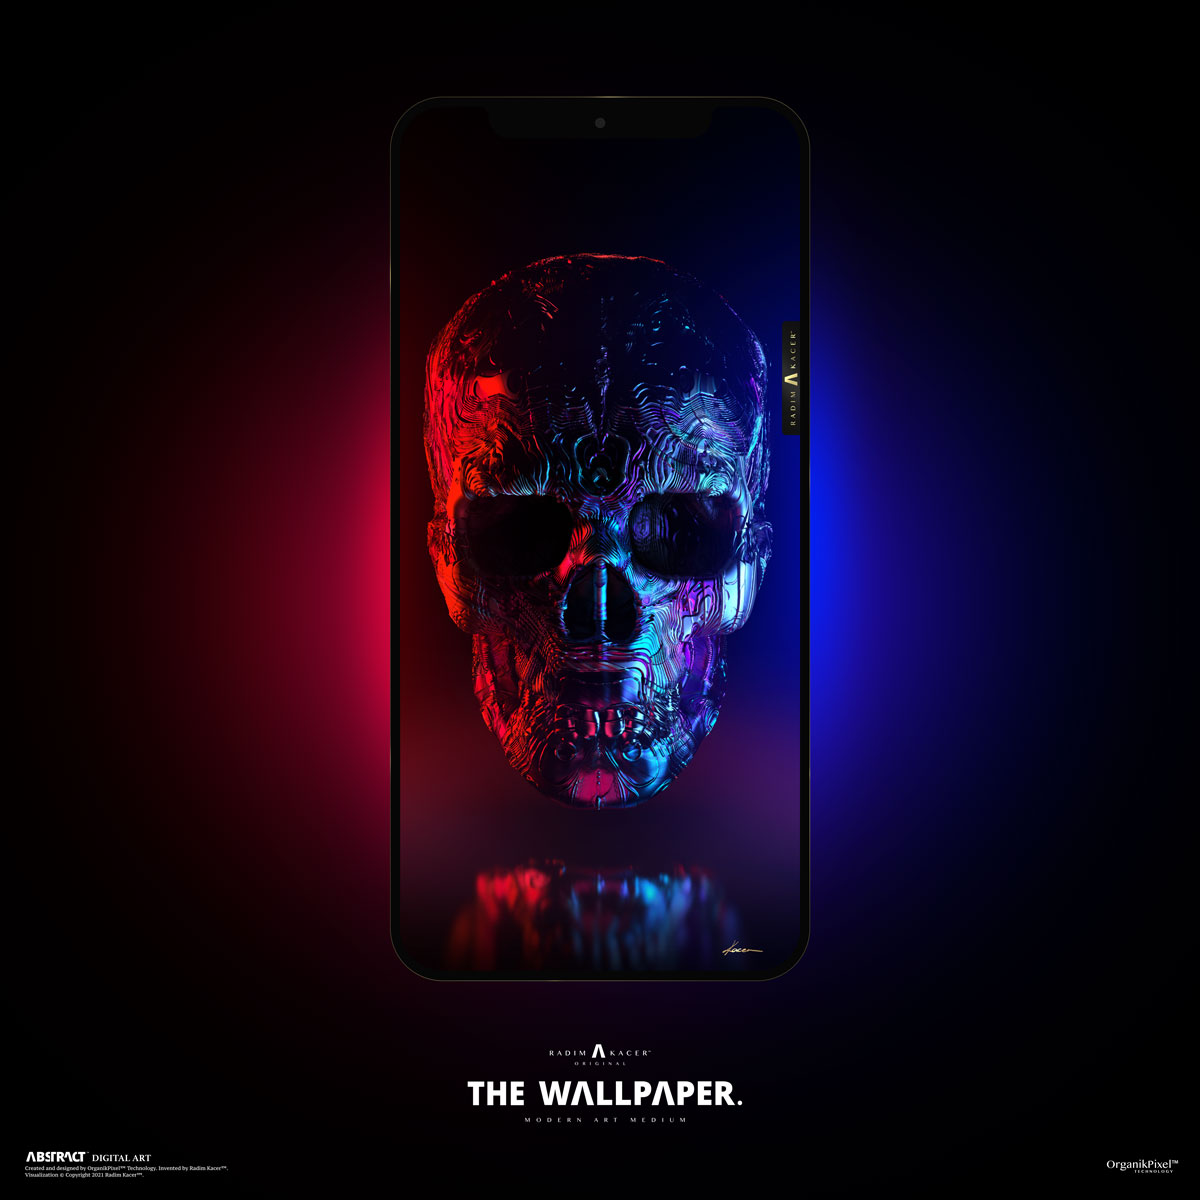 30+ Best iPhone 6 Wallpapers & backgrounds in HD Quality | Skull wallpaper, Iphone  6 wallpaper, Monster illustration